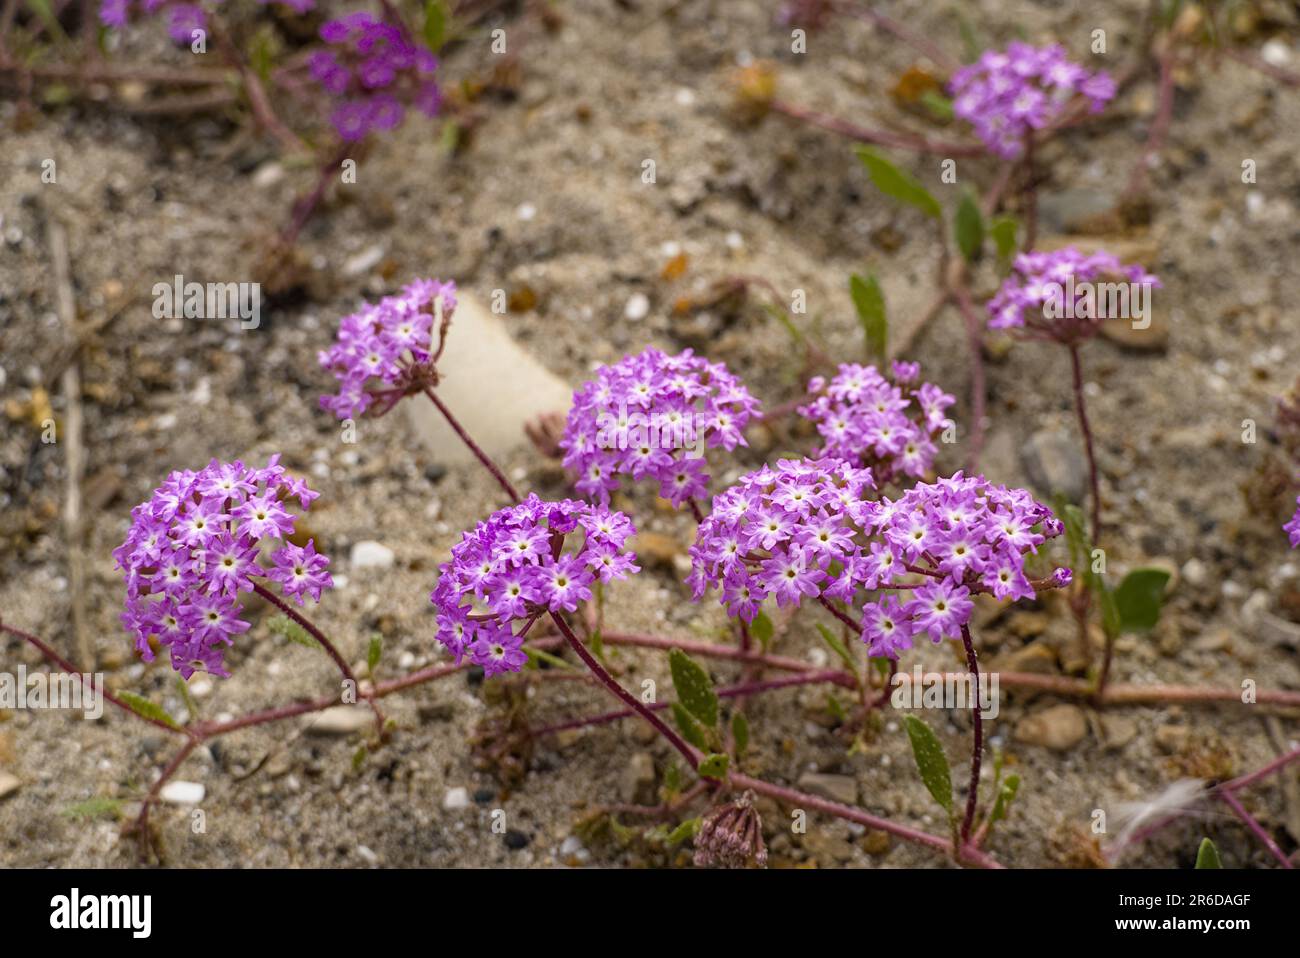 Pink sand verbena bloomsome at beach. Stock Photo